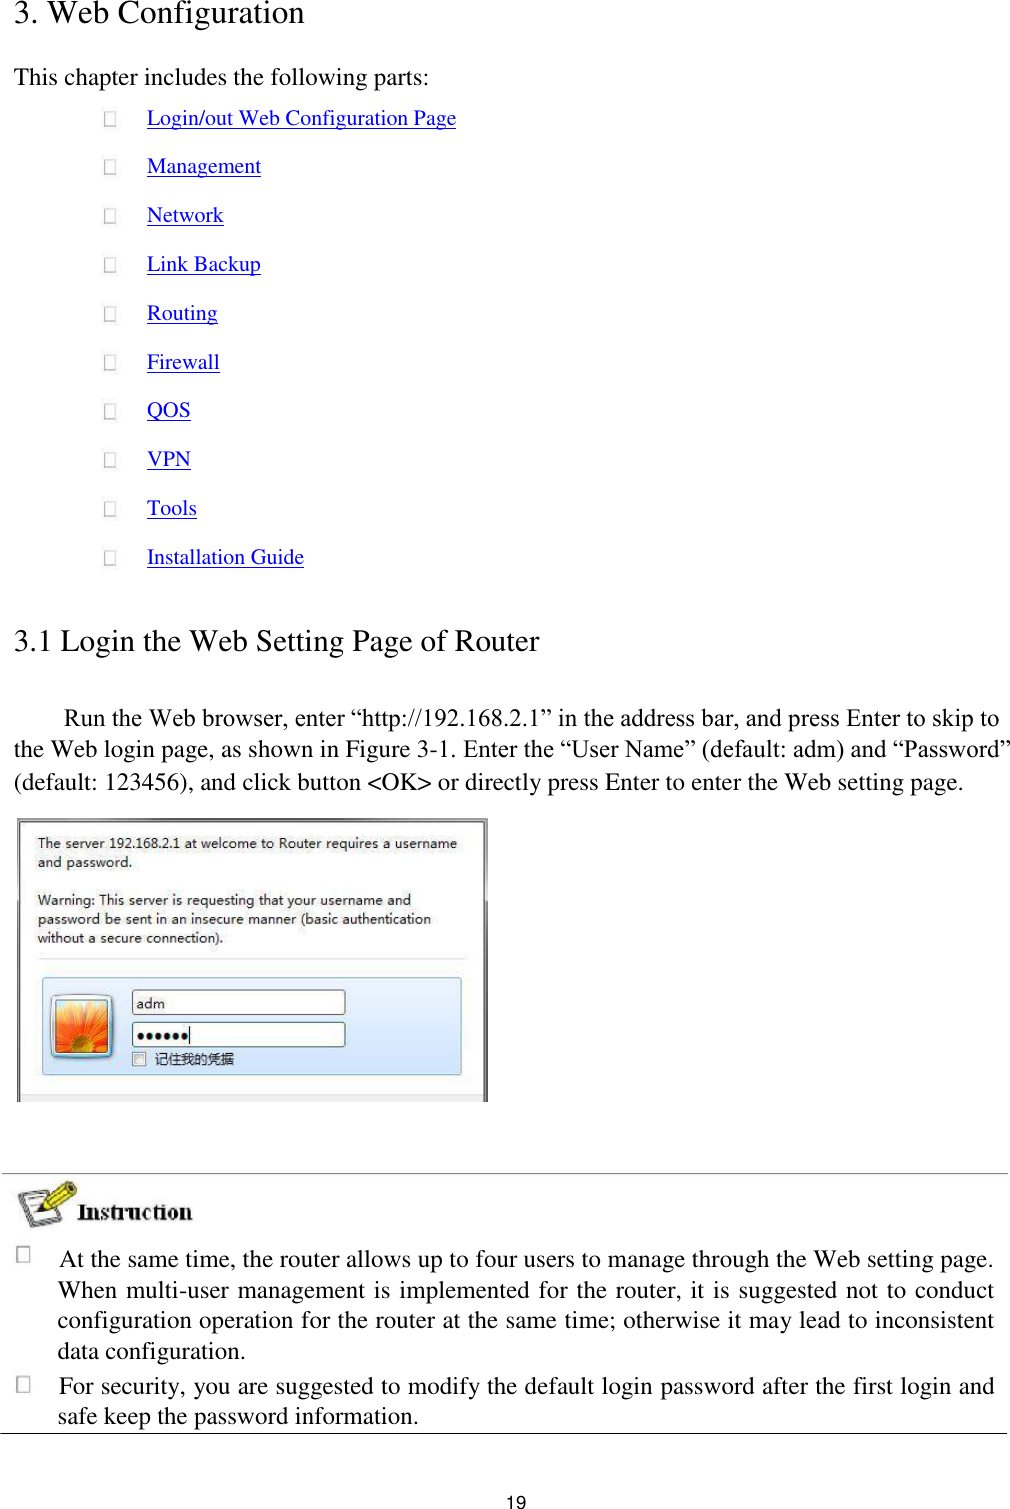 3. Web Configuration  This chapter includes the following parts:  Login/out Web Configuration Page  Management  Network  Link Backup  Routing  Firewall  QOS  VPN  Tools  Installation Guide   3.1 Login the Web Setting Page of Router   Run the Web browser, enter “http://192.168.2.1” in the address bar, and press Enter to skip to the Web login page, as shown in Figure 3-1. Enter the “User Name” (default: adm) and “Password”  (default: 123456), and click button &lt;OK&gt; or directly press Enter to enter the Web setting page.                       At the same time, the router allows up to four users to manage through the Web setting page. When multi-user management is implemented for the router, it is suggested not to conduct configuration operation for the router at the same time; otherwise it may lead to inconsistent data configuration.   For security, you are suggested to modify the default login password after the first login and safe keep the password information.   19 